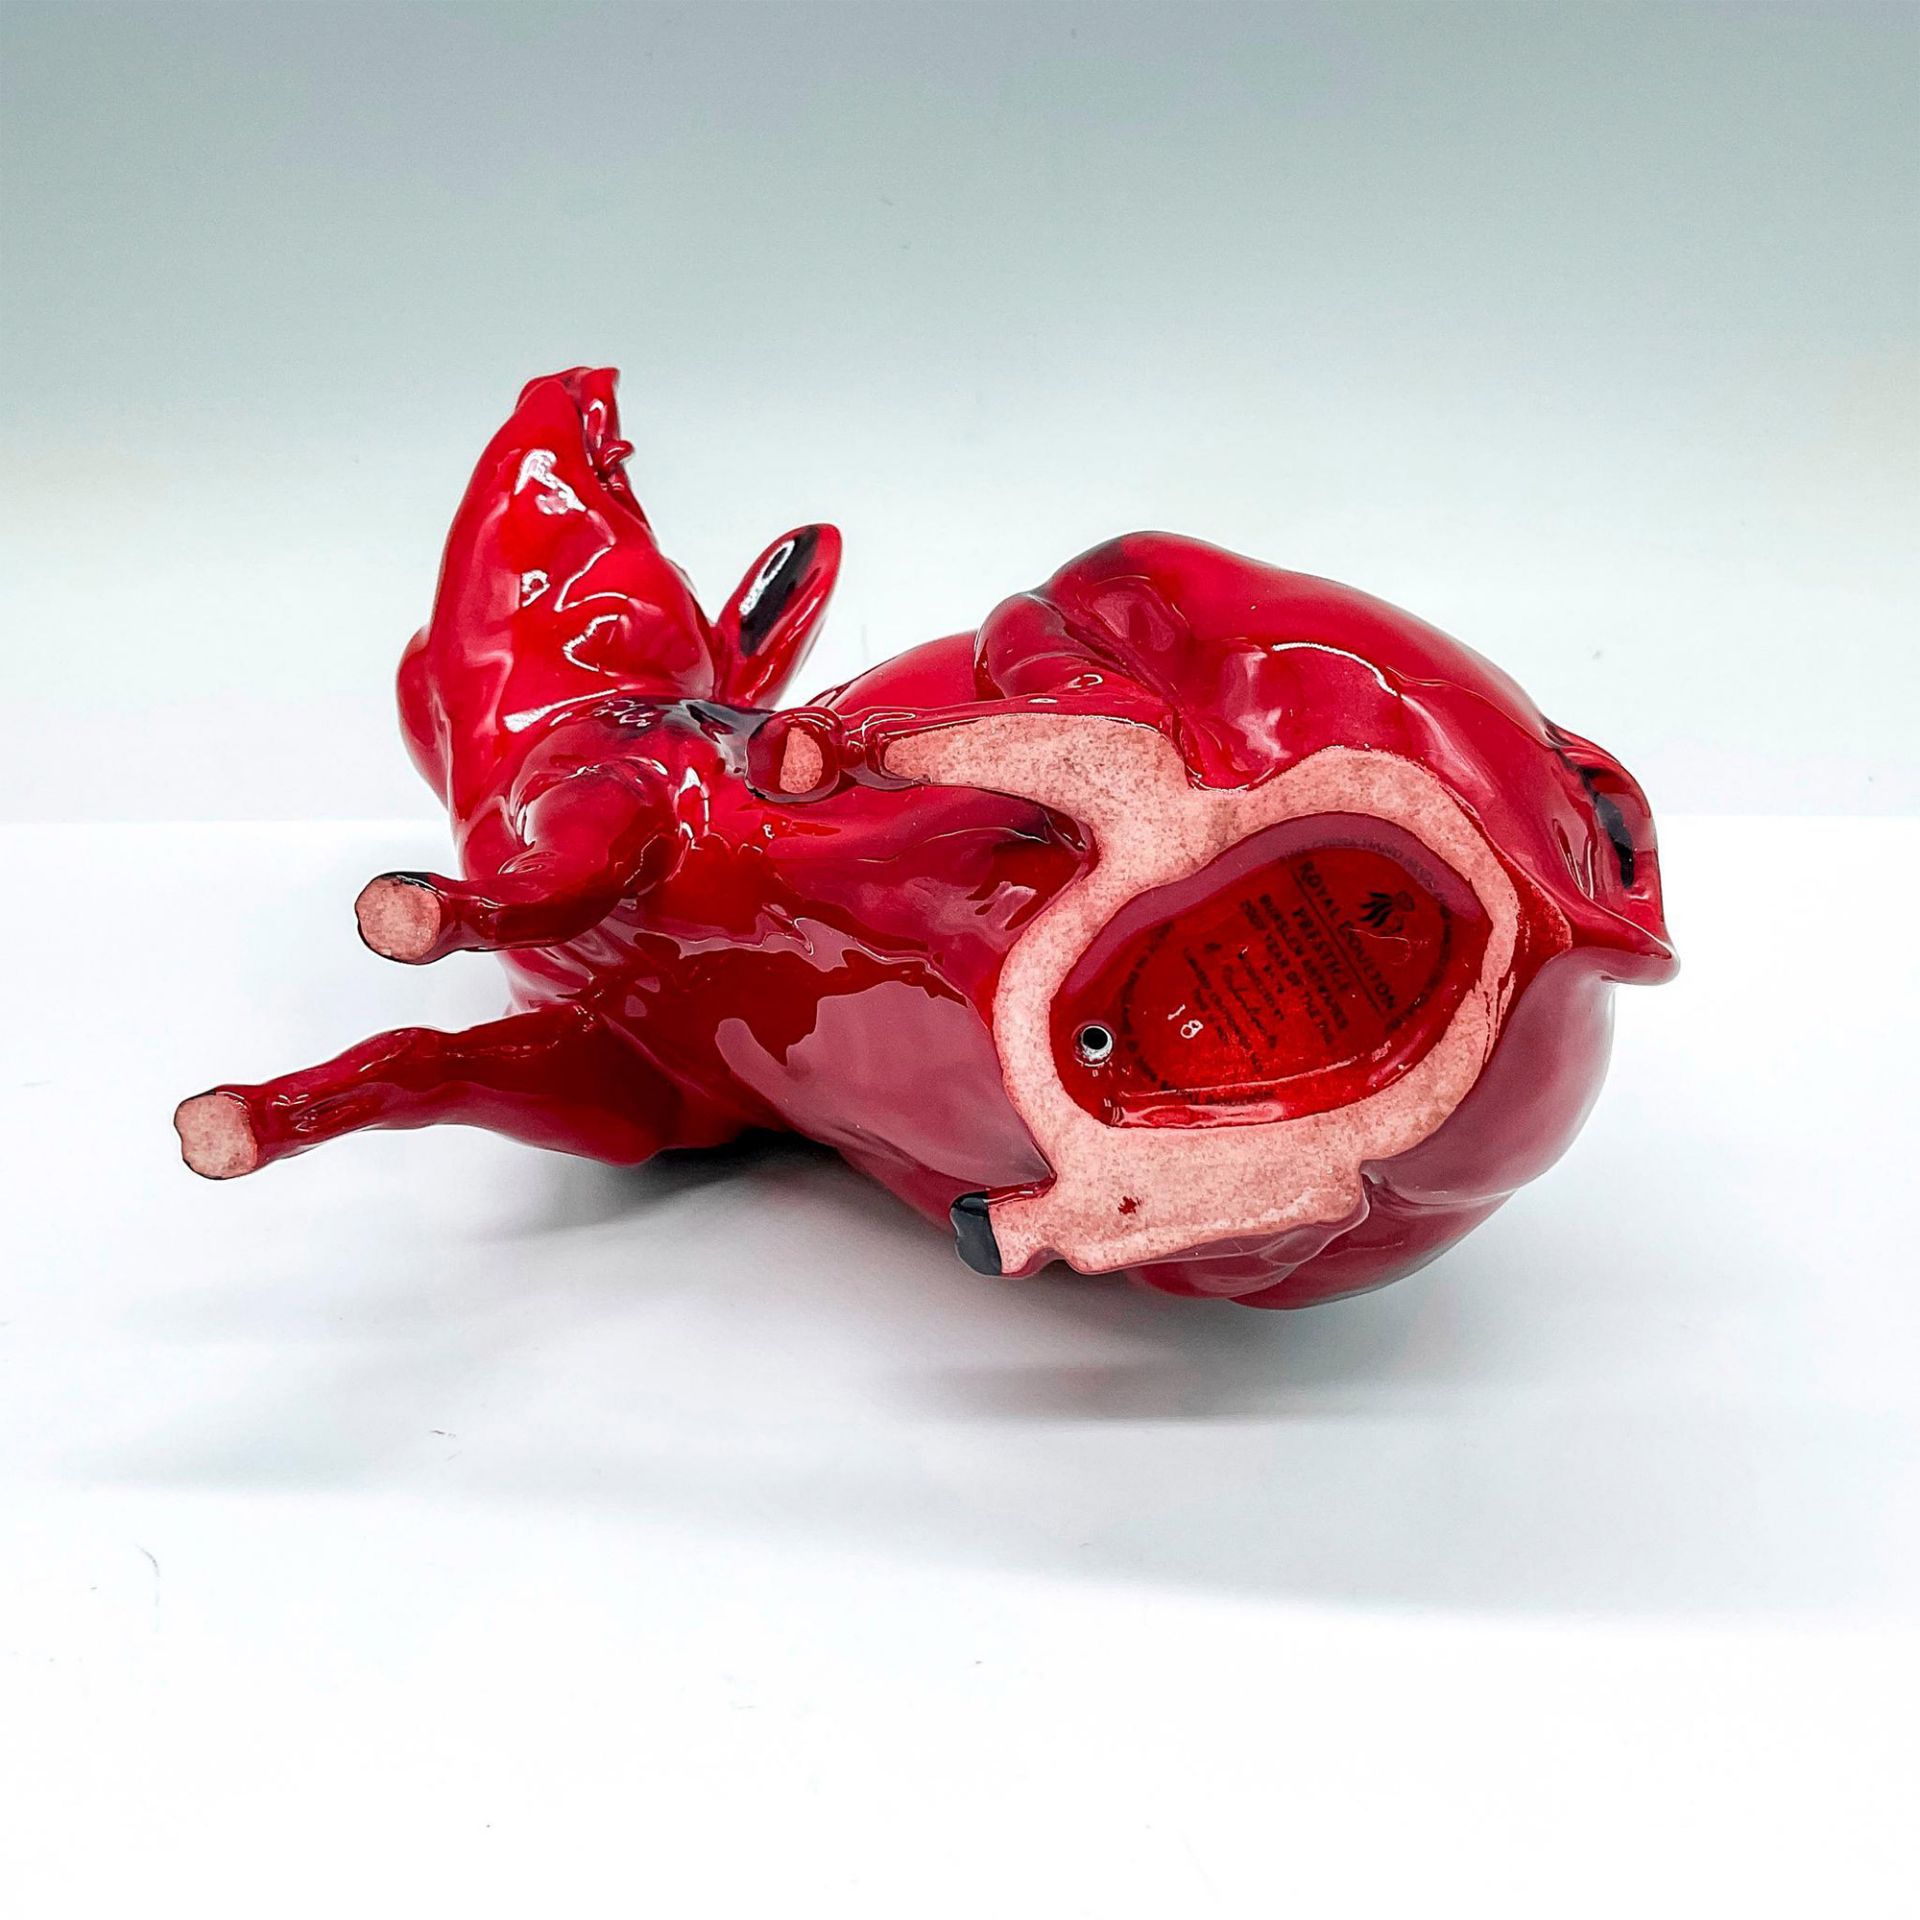 2007 Year of the Pig BA78 - Royal Doulton Figurine - Image 3 of 4